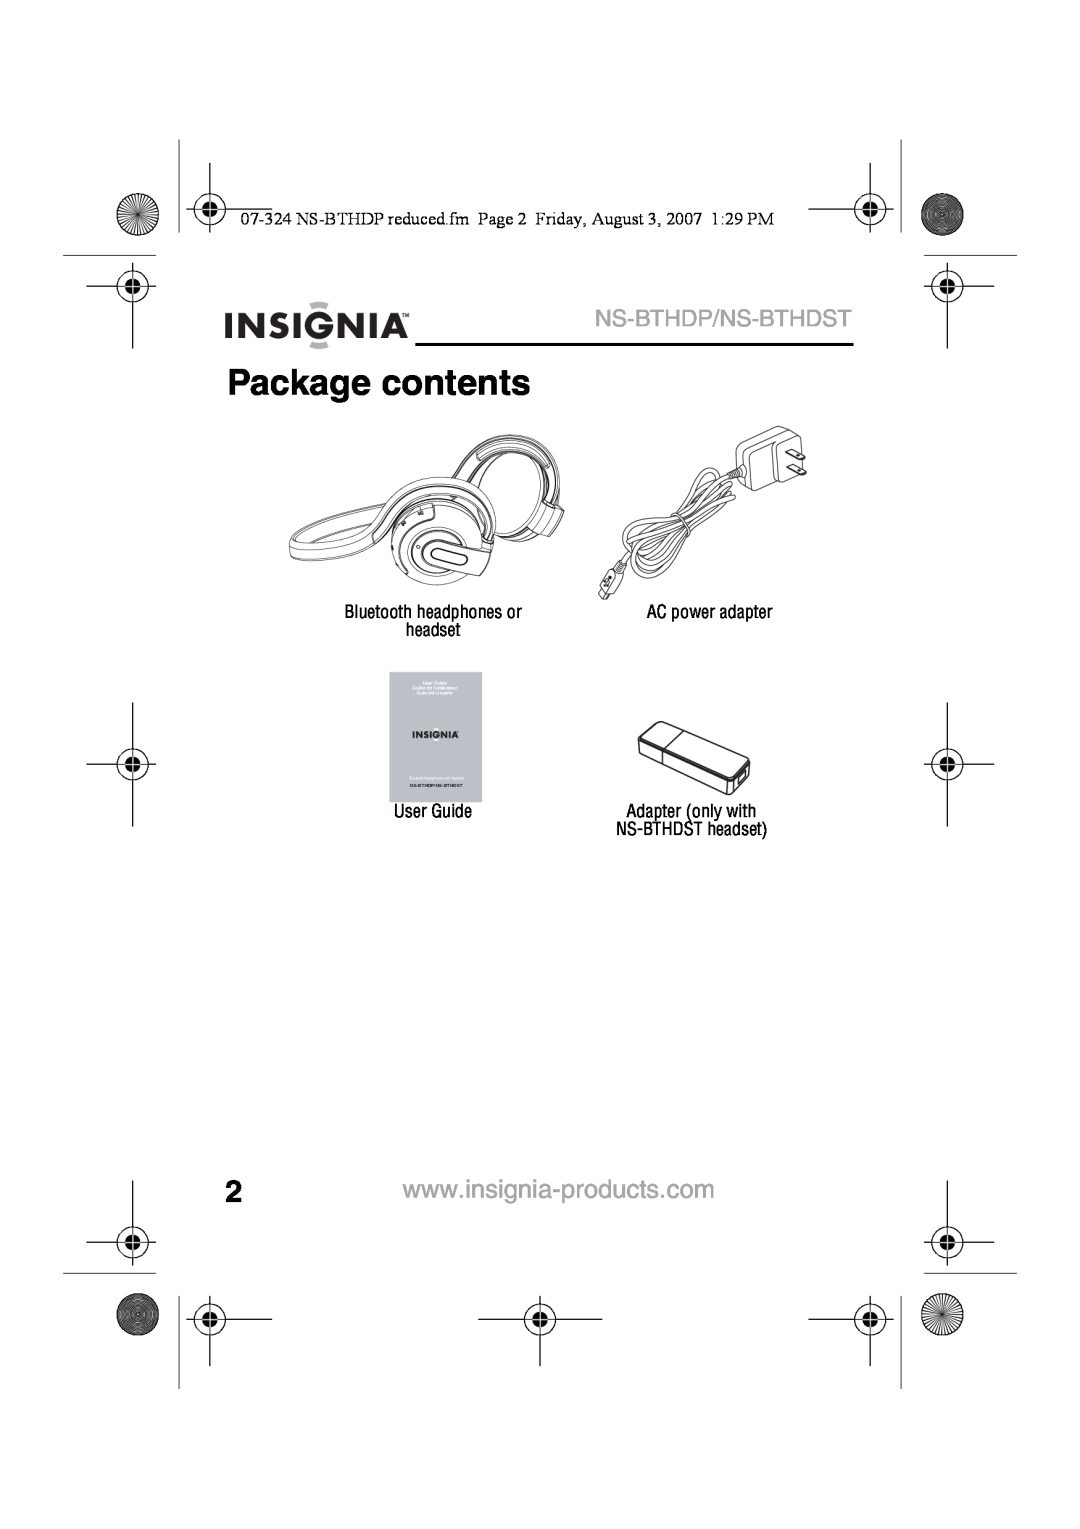 Insignia NS-BTHDST Package contents, Ns-Bthdp/Ns-Bthdst, Bluetooth headphones or, AC power adapter, headset, User Guide 